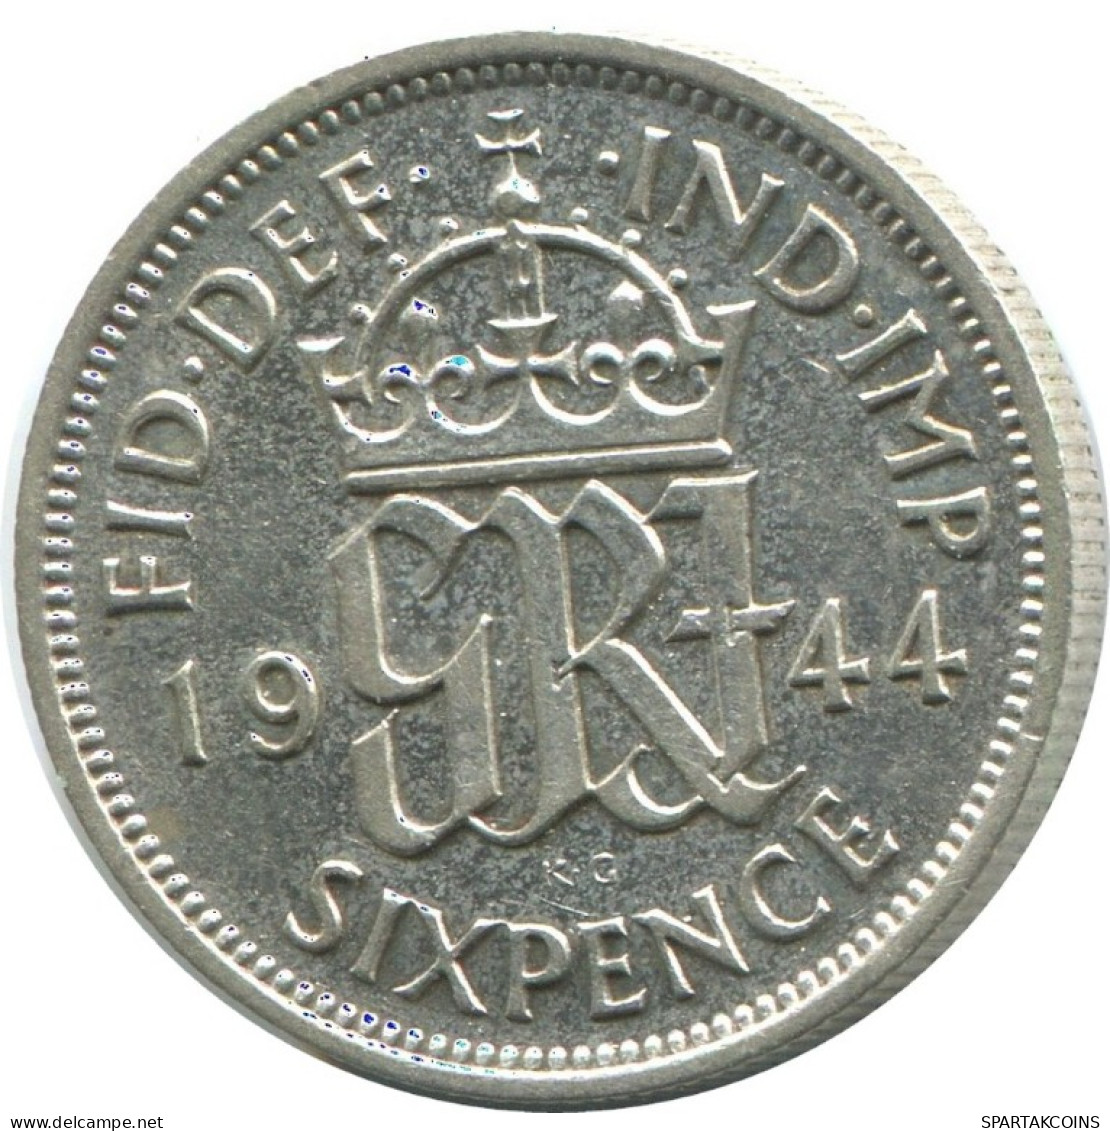 SIXPENCE 1944 UK GRANDE-BRETAGNE GREAT BRITAIN ARGENT Pièce #AG944.1.F.A - H. 6 Pence